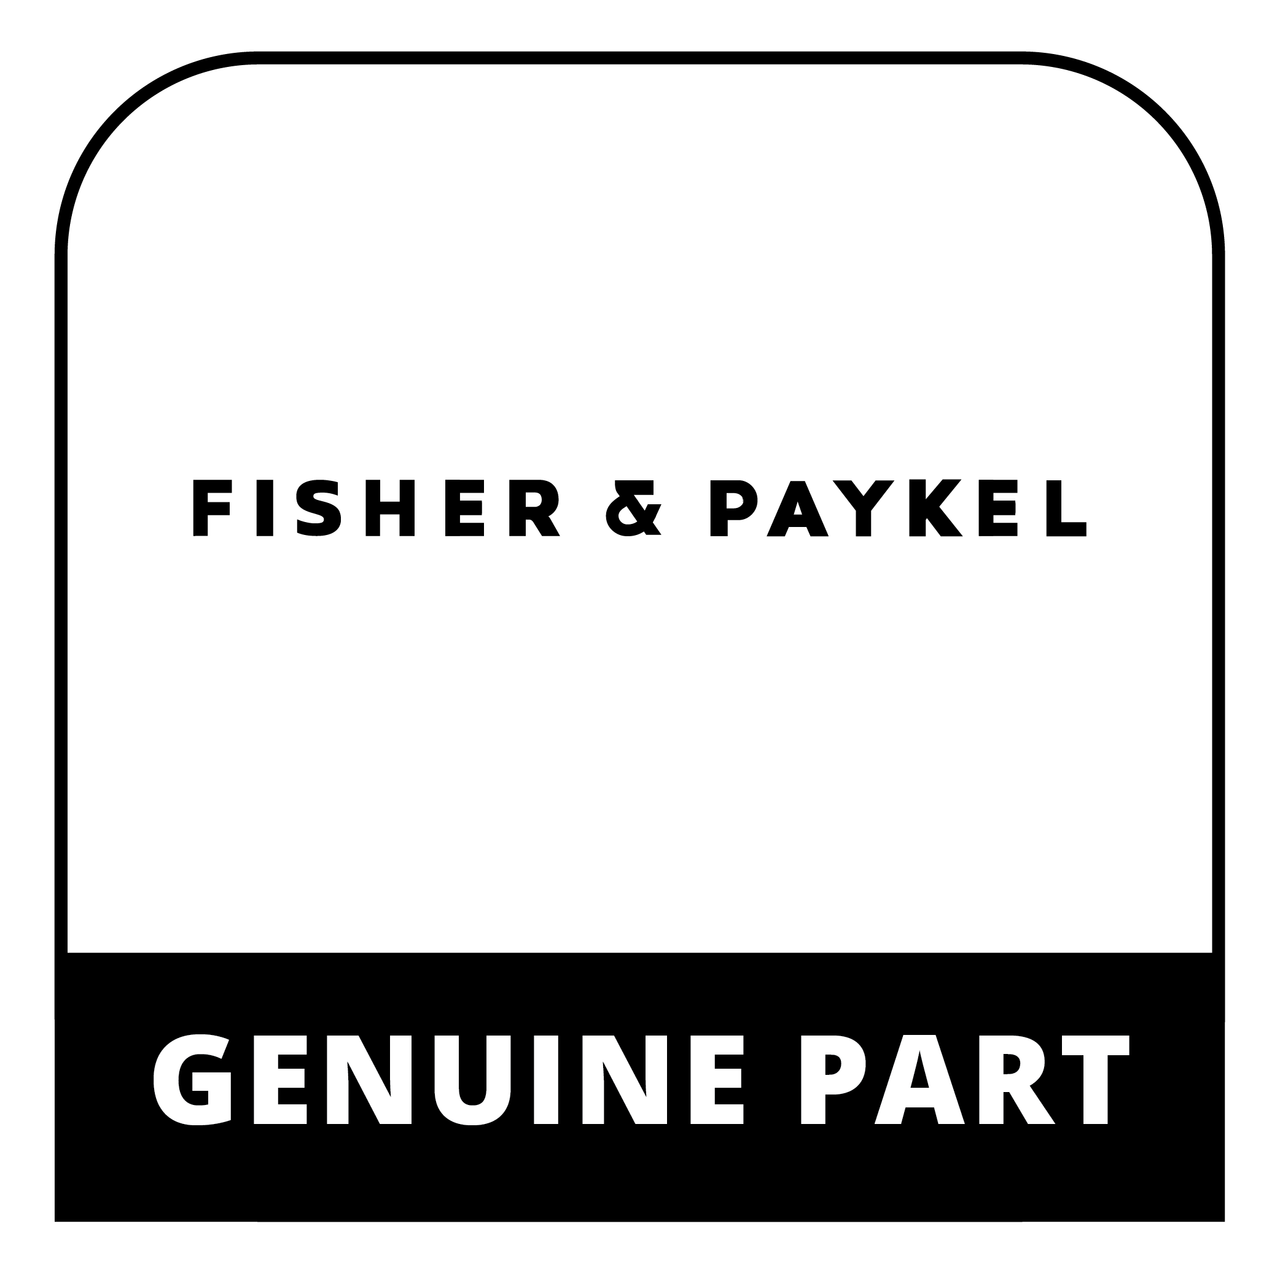 Fisher & Paykel 240467 - Fasco-Jakel Convers. Sub Assy - Genuine Fisher & Paykel (DCS) Part